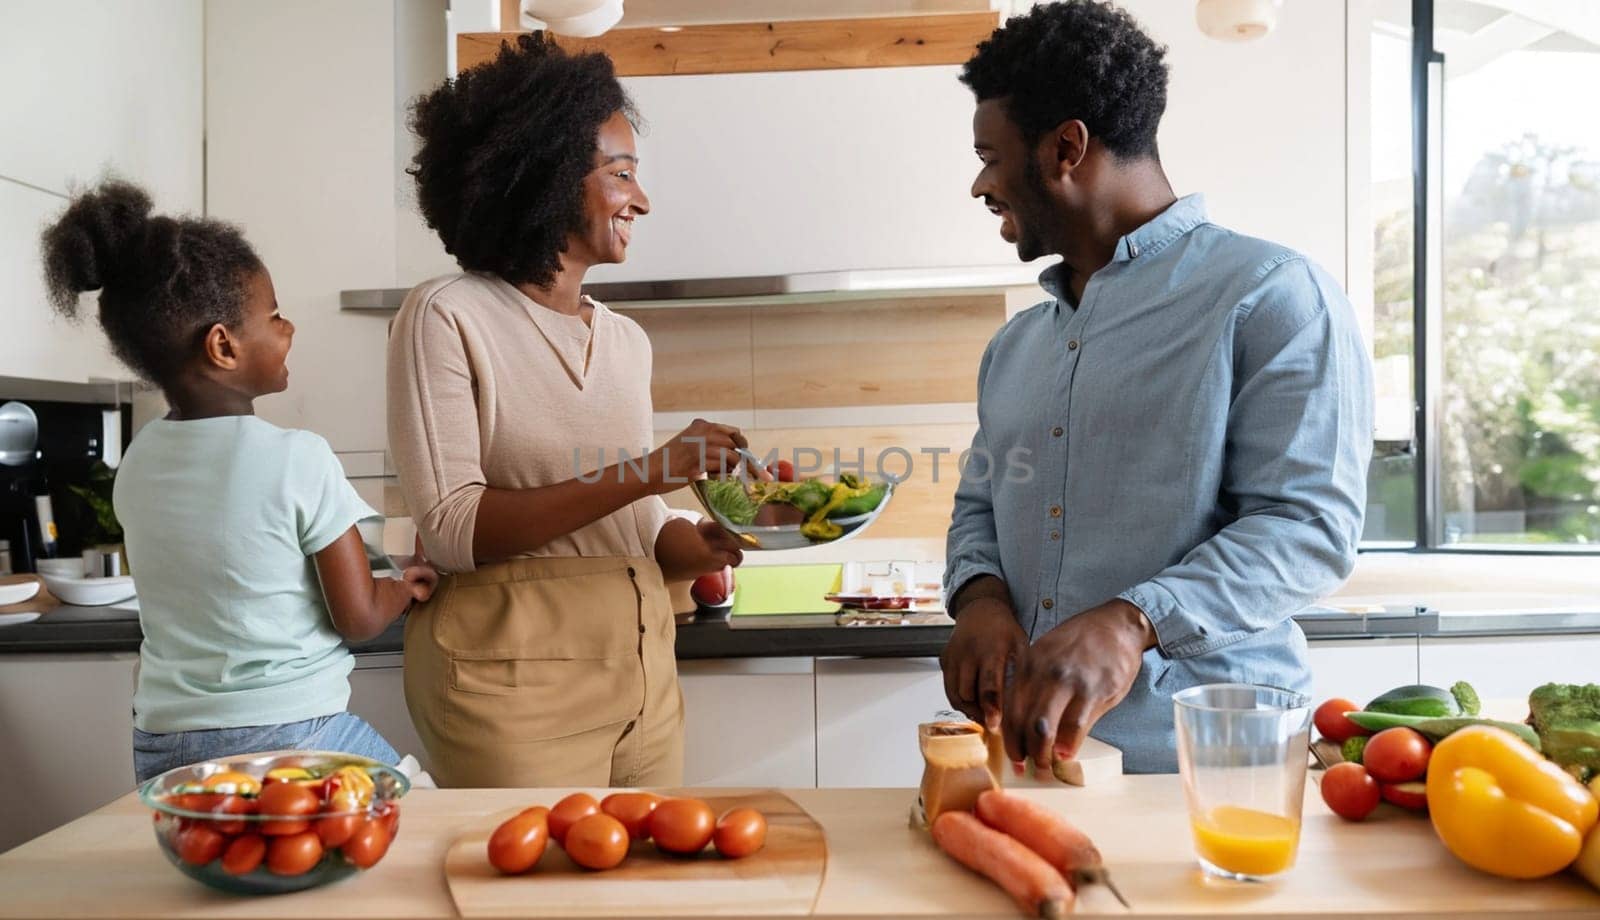 Happy family with father, mother and daughter in the kitchen, happy mom, dad and child with attachment and relationship, lifestyle and nutrition concept. High quality image